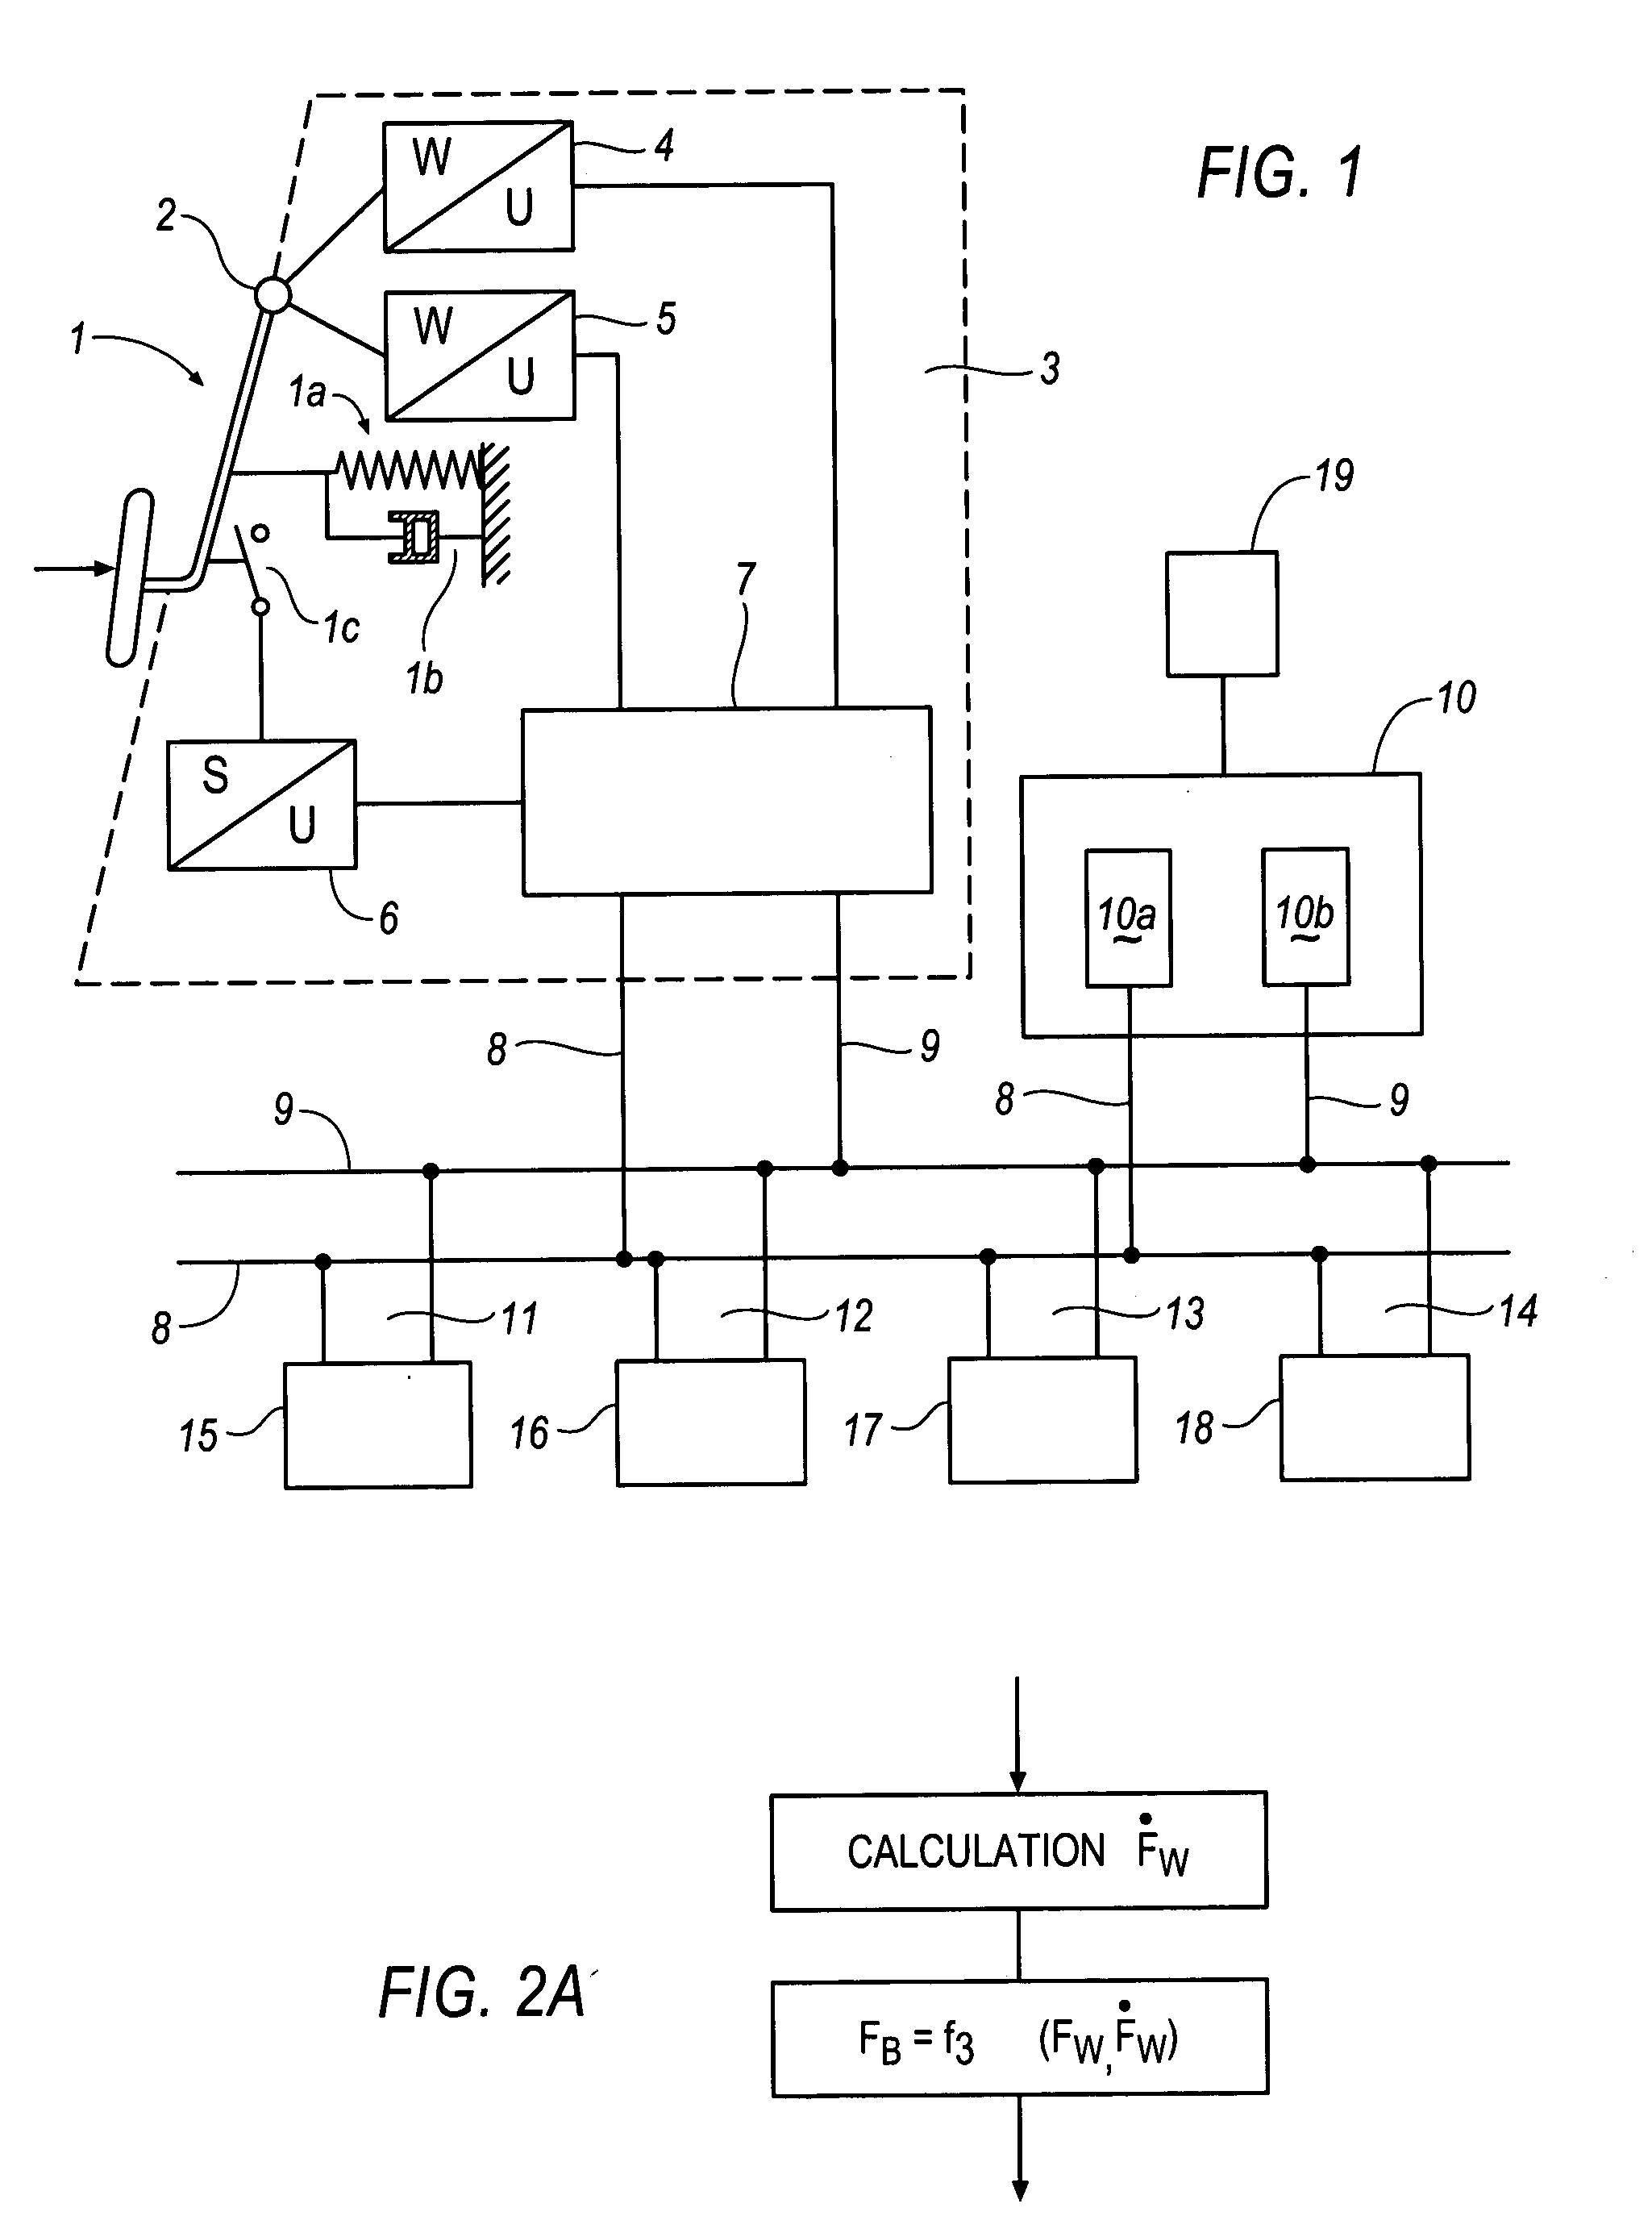 Method and device for controlling or regulating the brake system of a motor vehicle according to the "brake by wire" principle